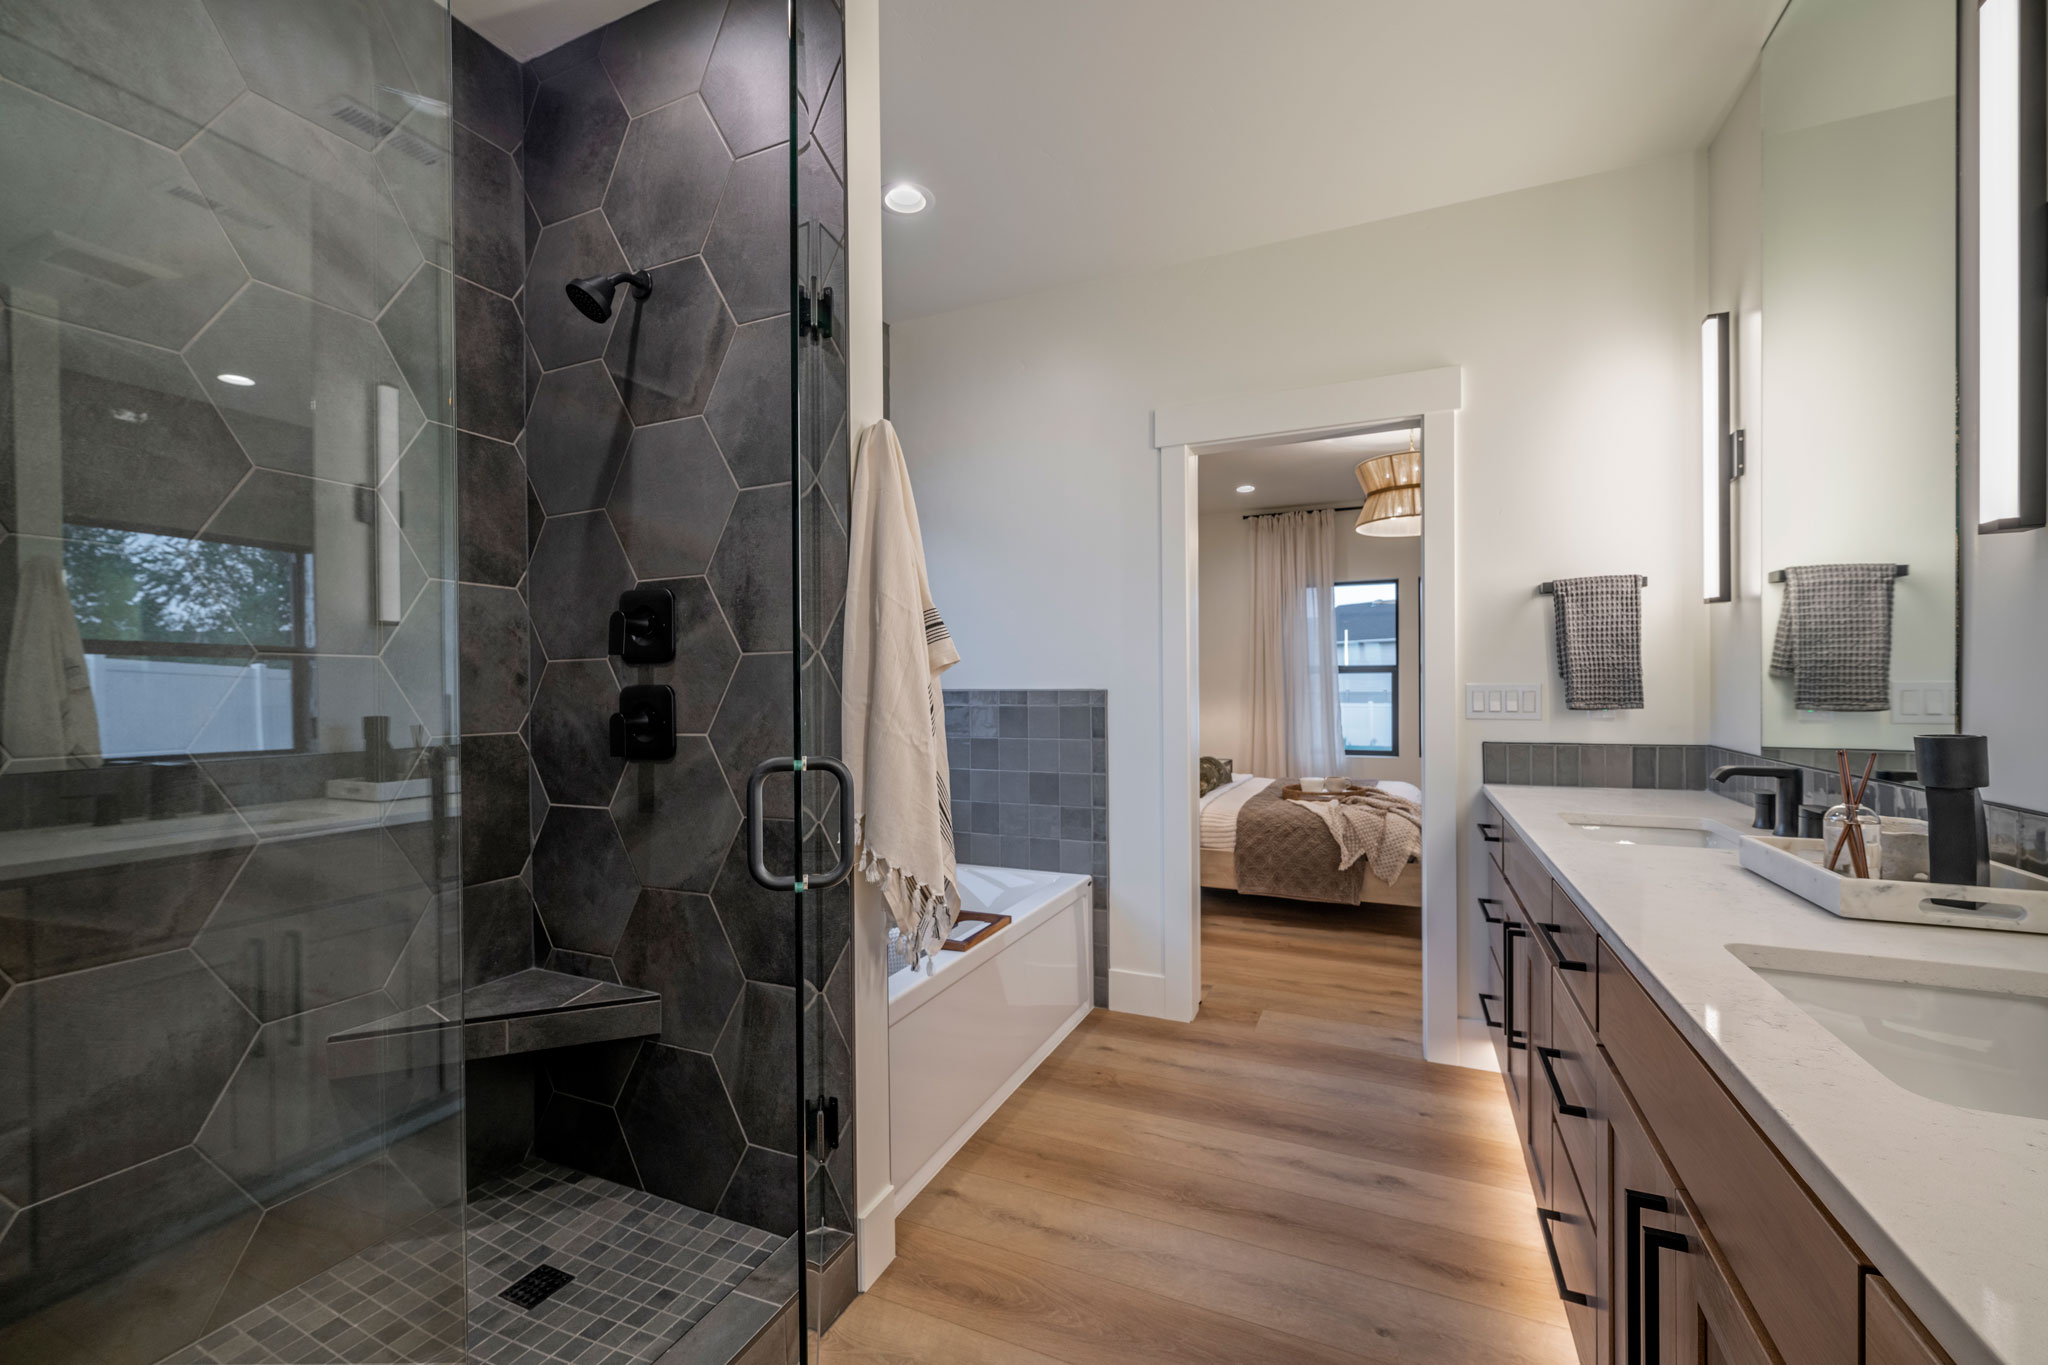 The primary bathroom includes darker stone on the walls of the shower but brighter tones in the rest of the space.